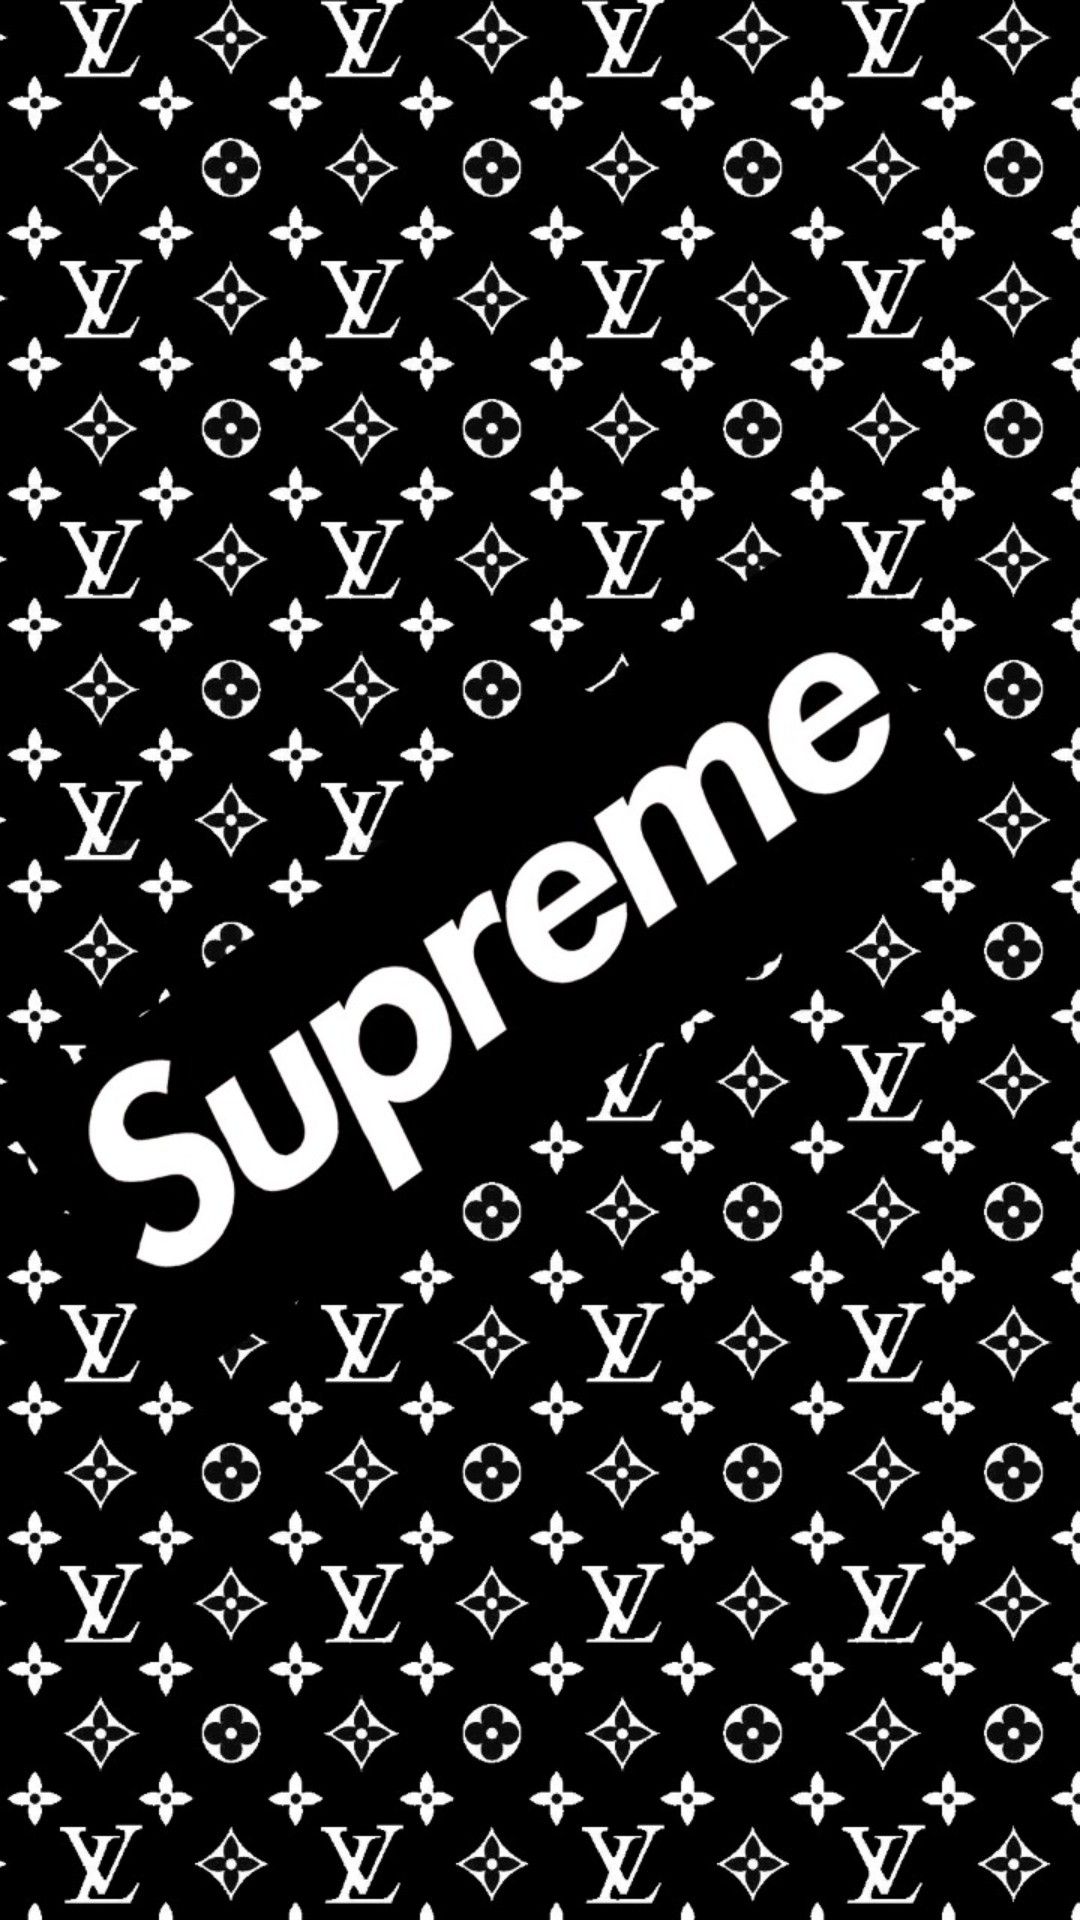 Download Supreme LV Wallpaper by Prybz - 72 - Free on ZEDGE™️ now. Browse  millions of popular s…